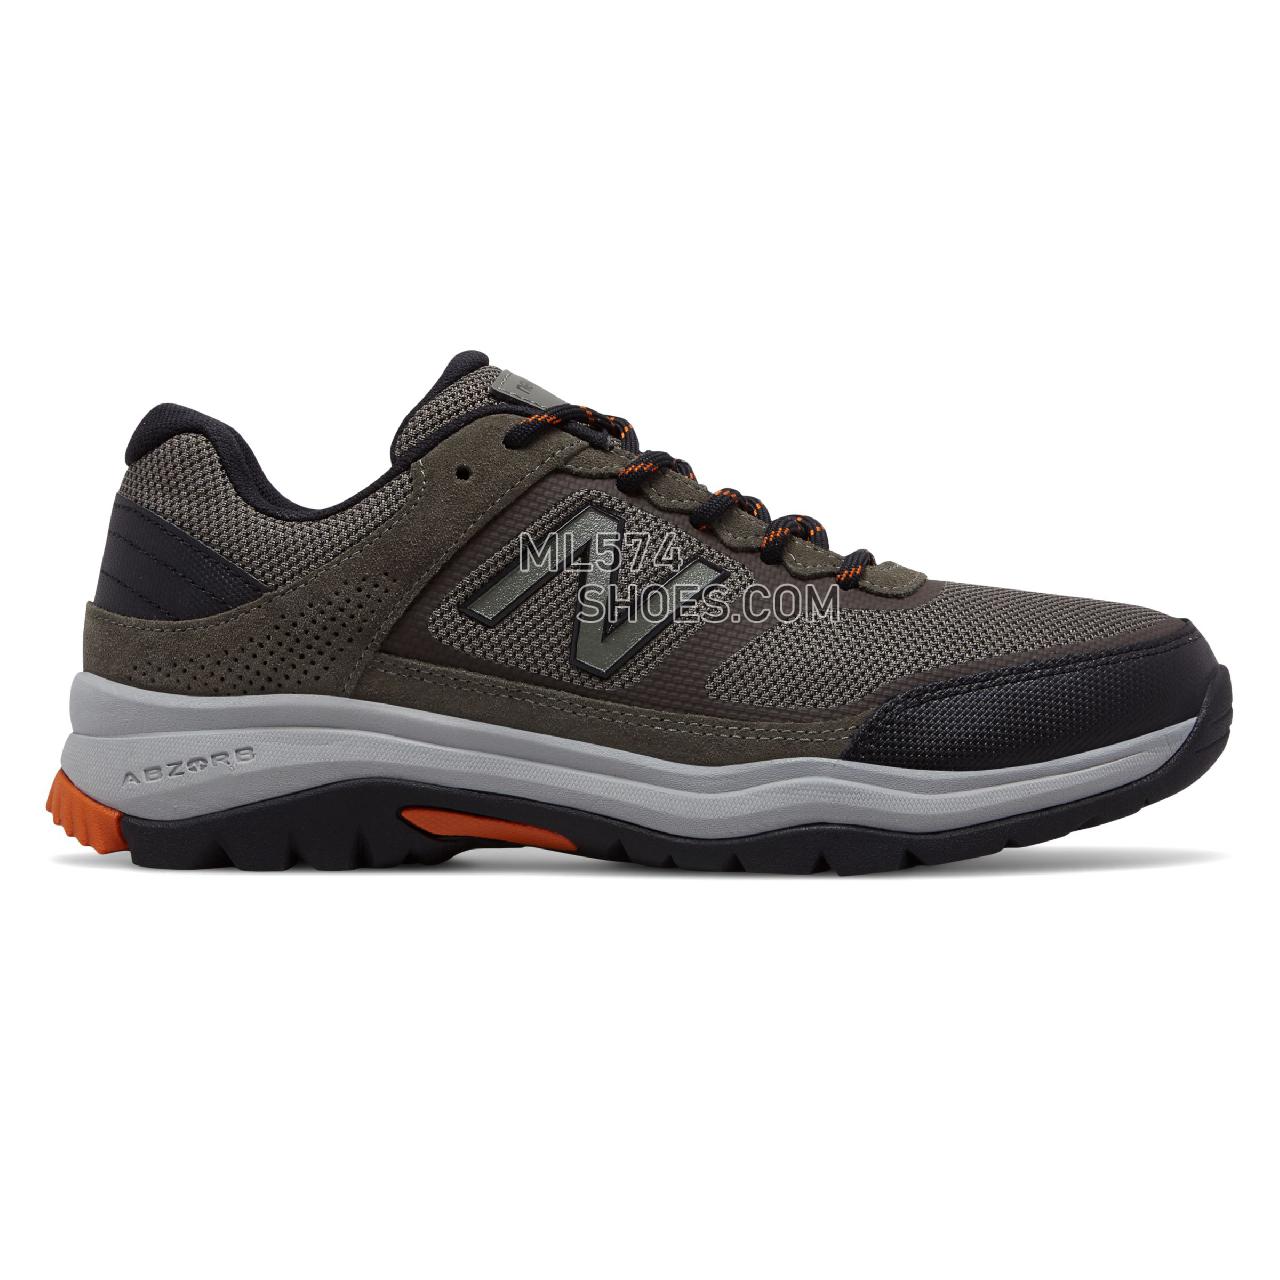 New Balance 669 - Men's 669 - Walking Military Green with Black - MW669GN